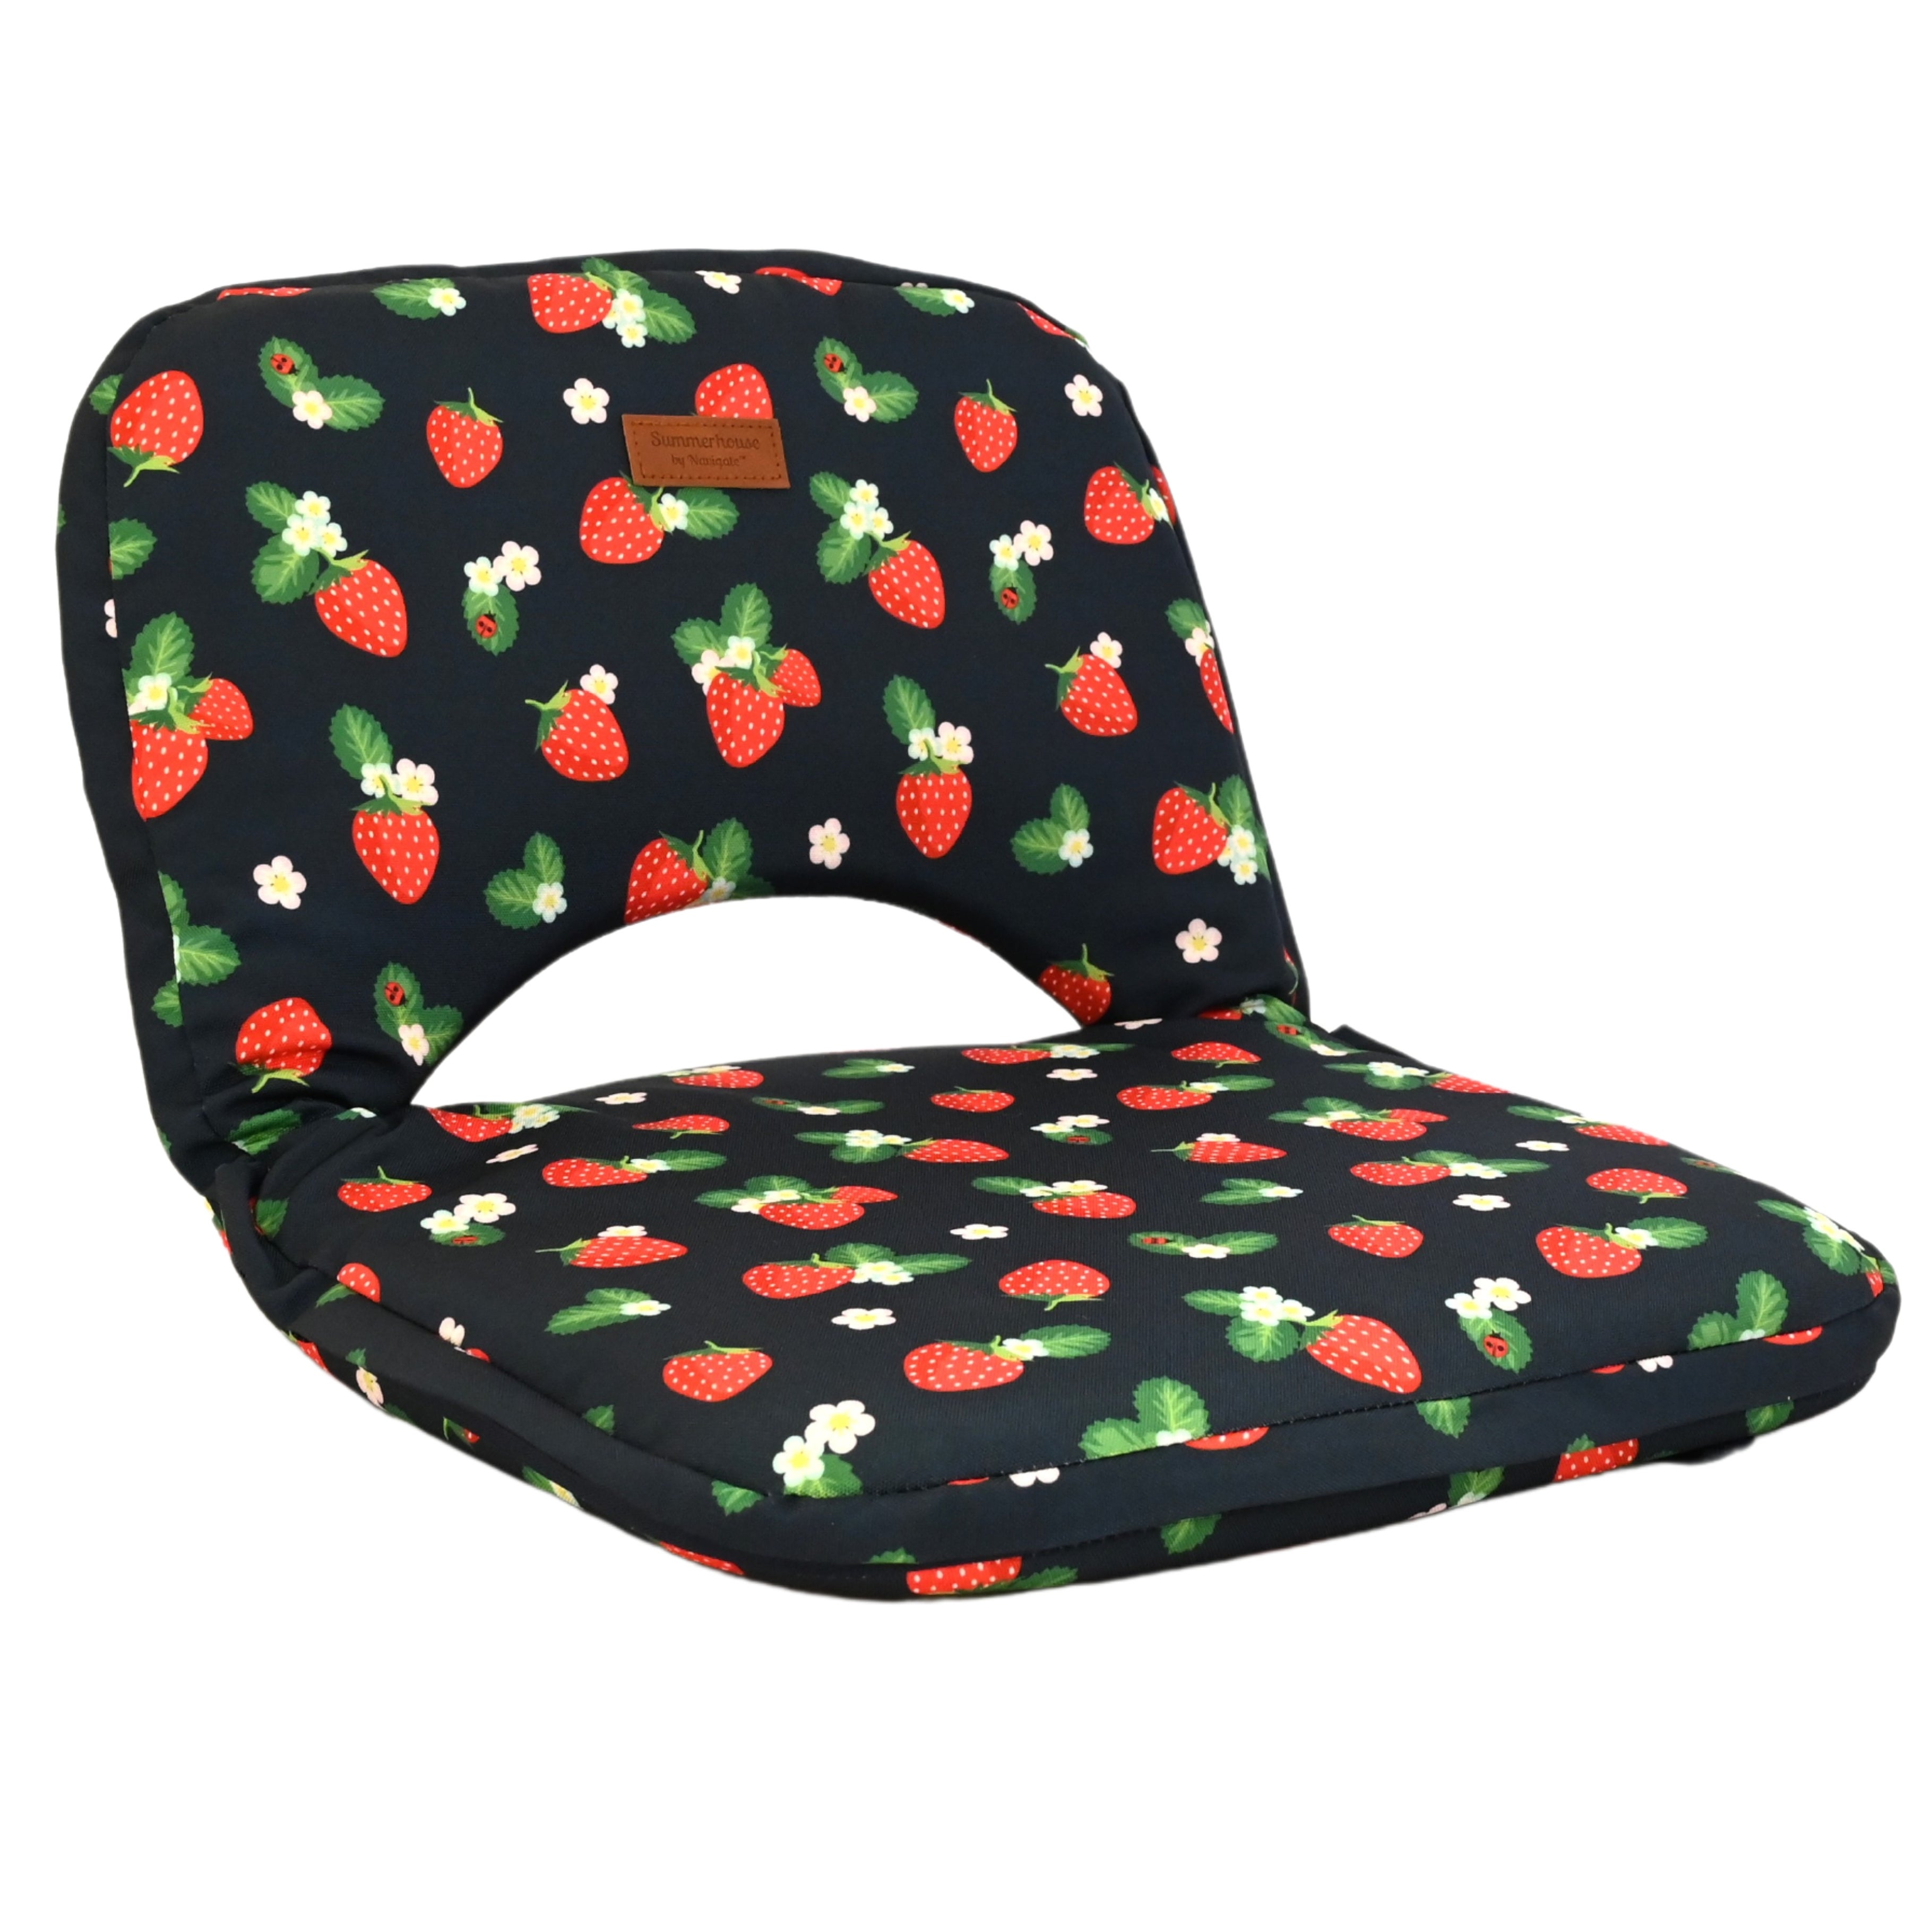 Strawberries & Cream 5 Position Fold Flat Picnic Chair with Carry Handle